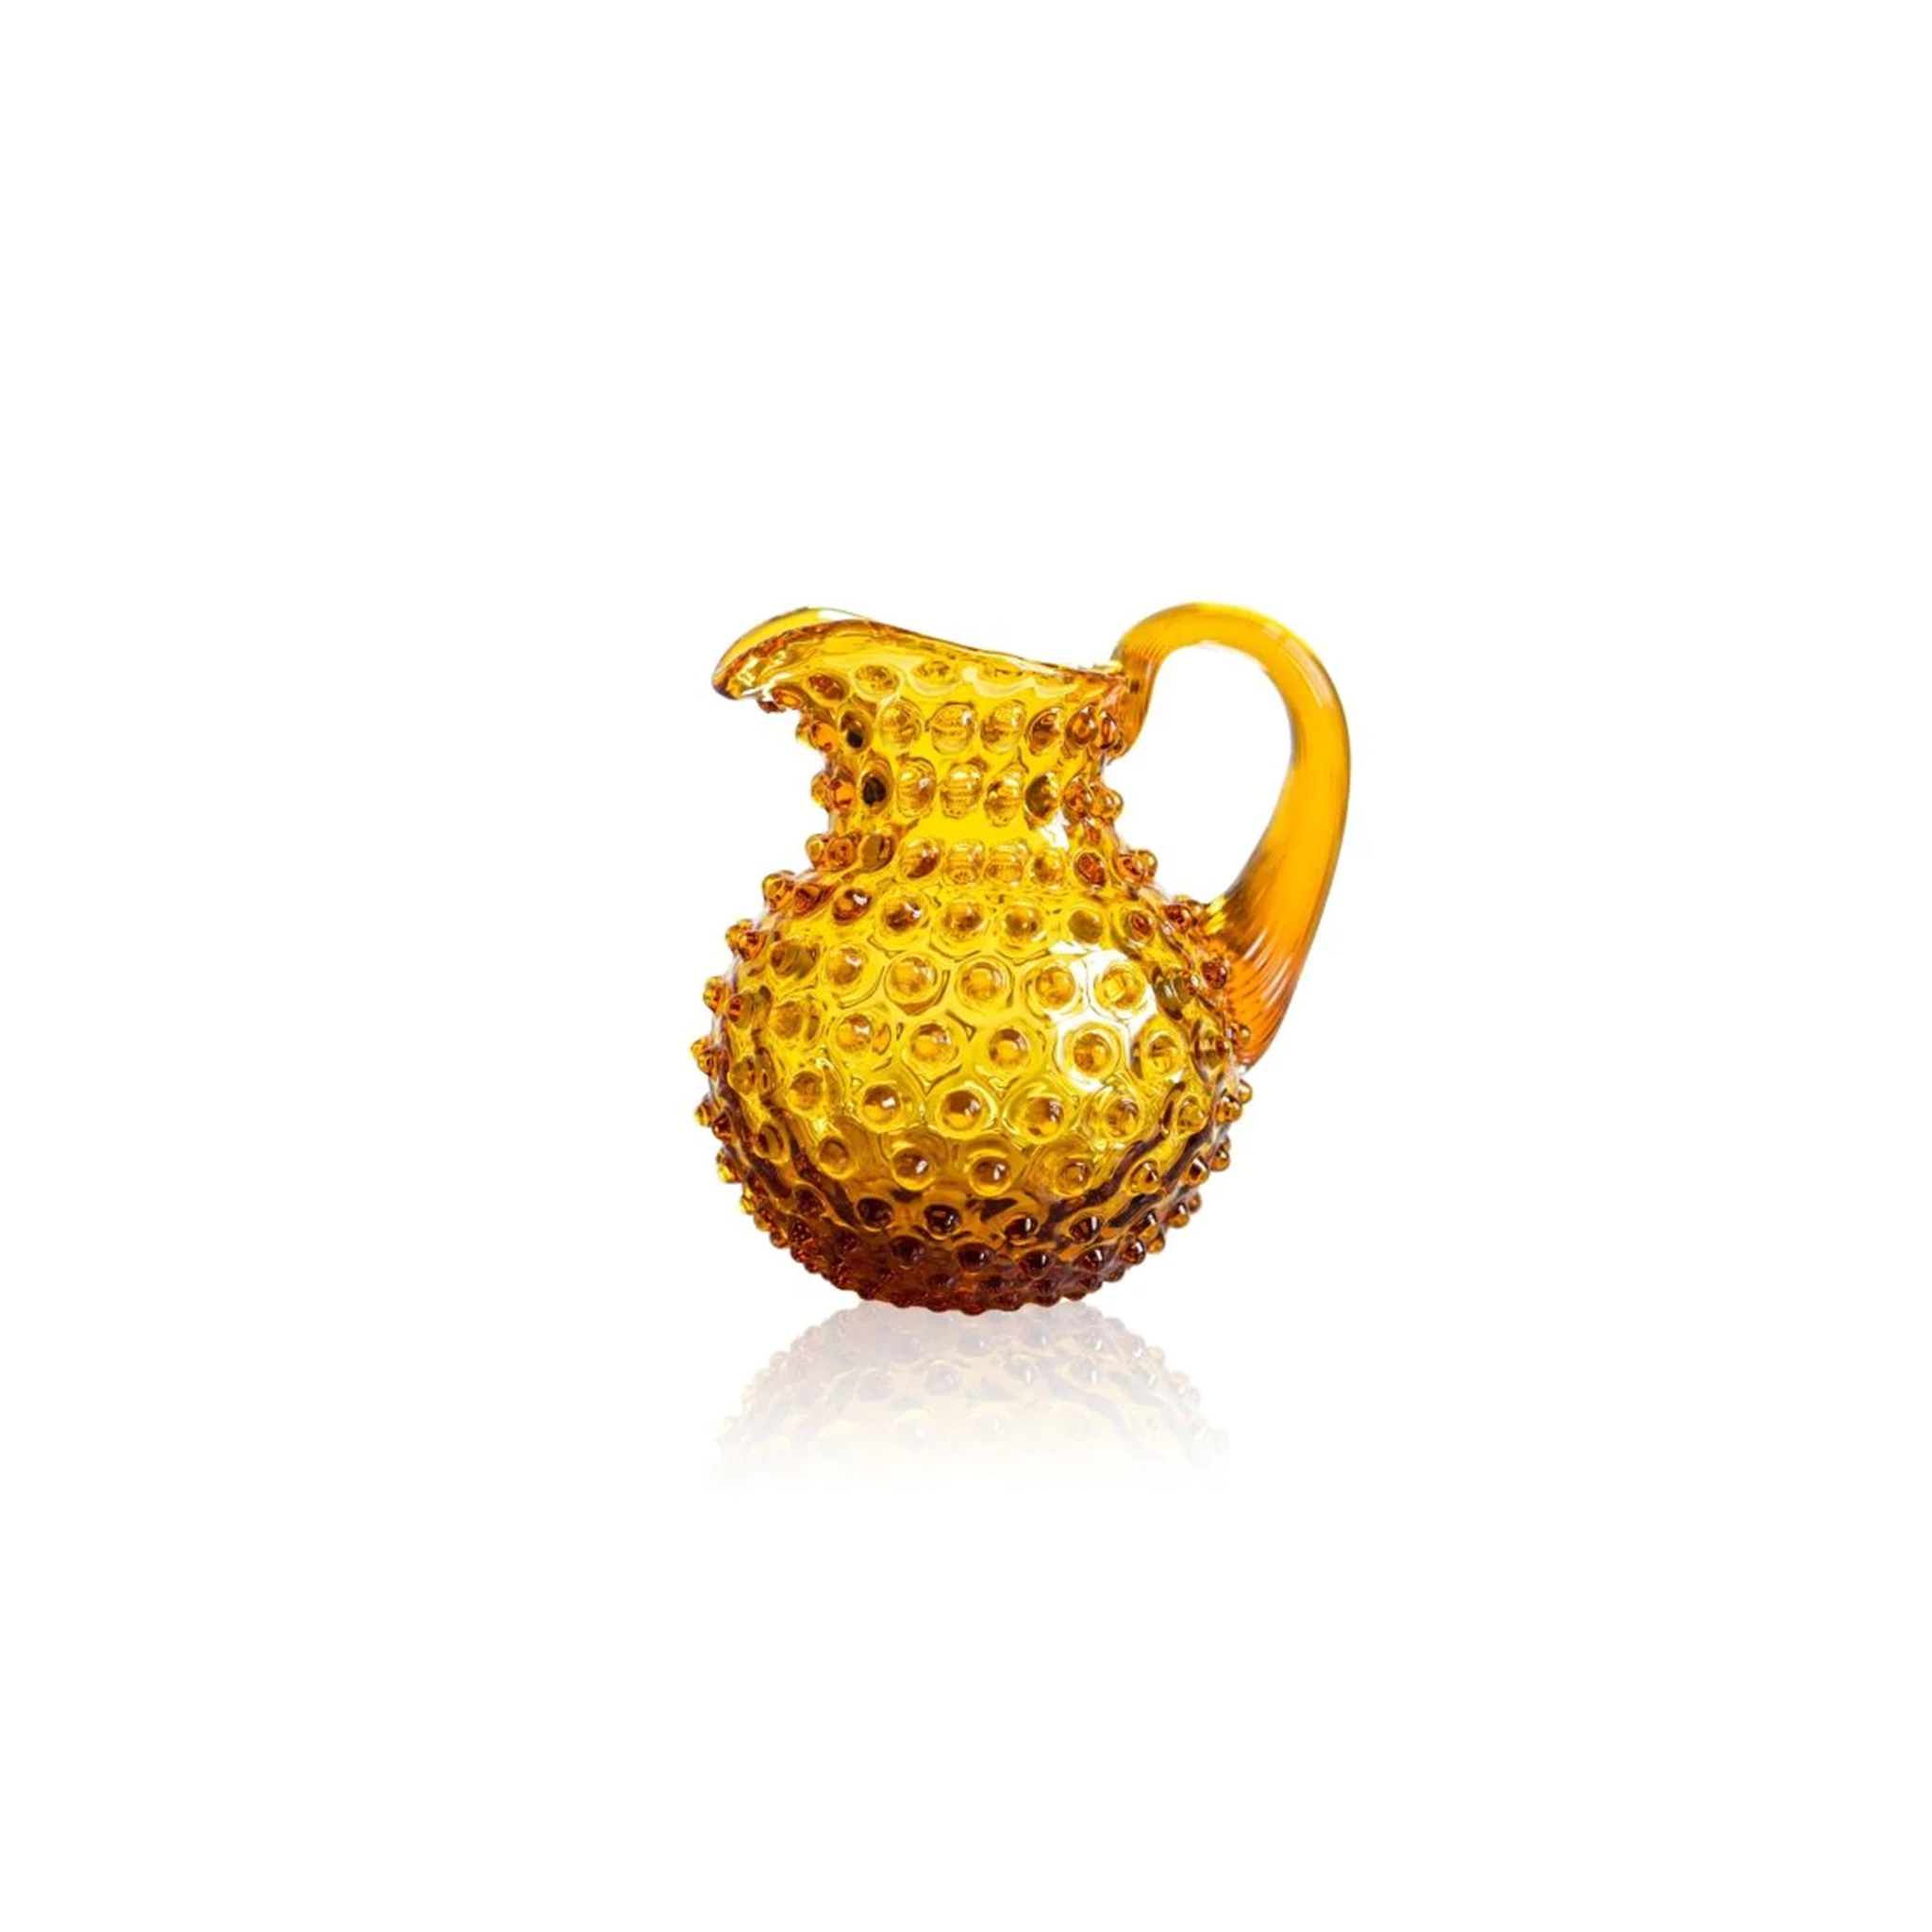 a amber hobnail creamer sitting on top of a white surface